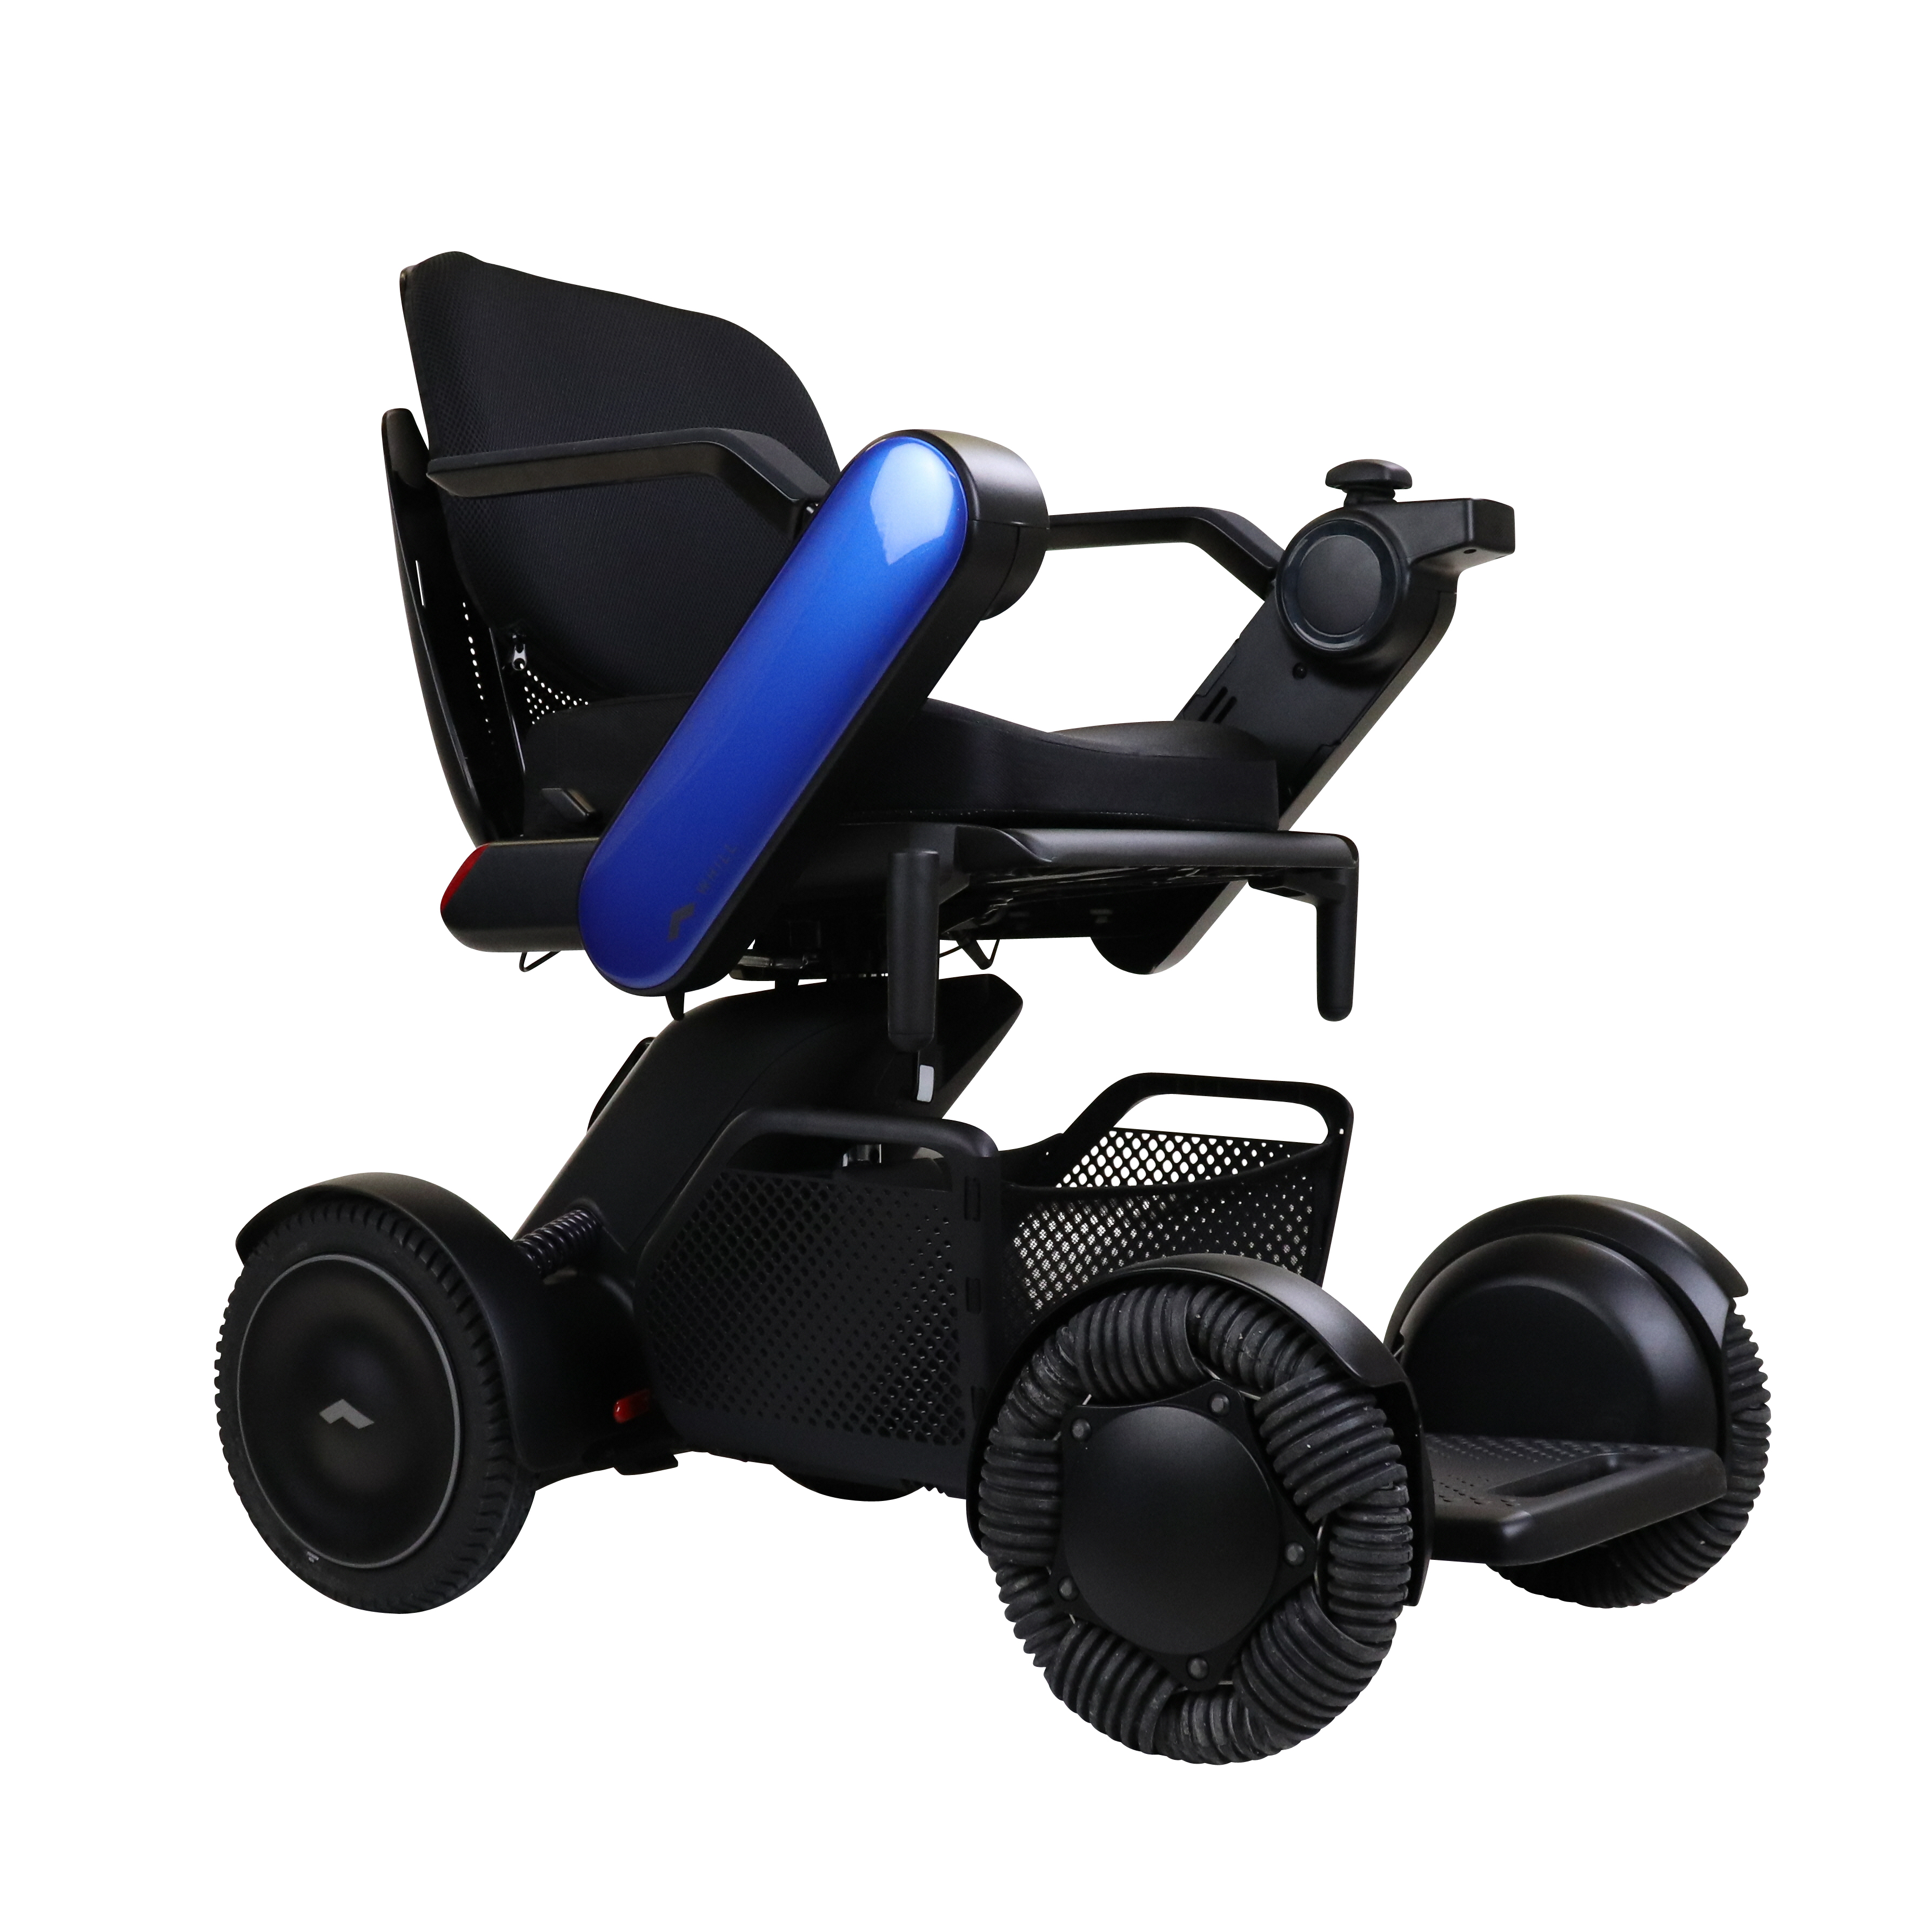 The WHILL C2 power chair is shown at an angle, with a blue accent colour on the armrest